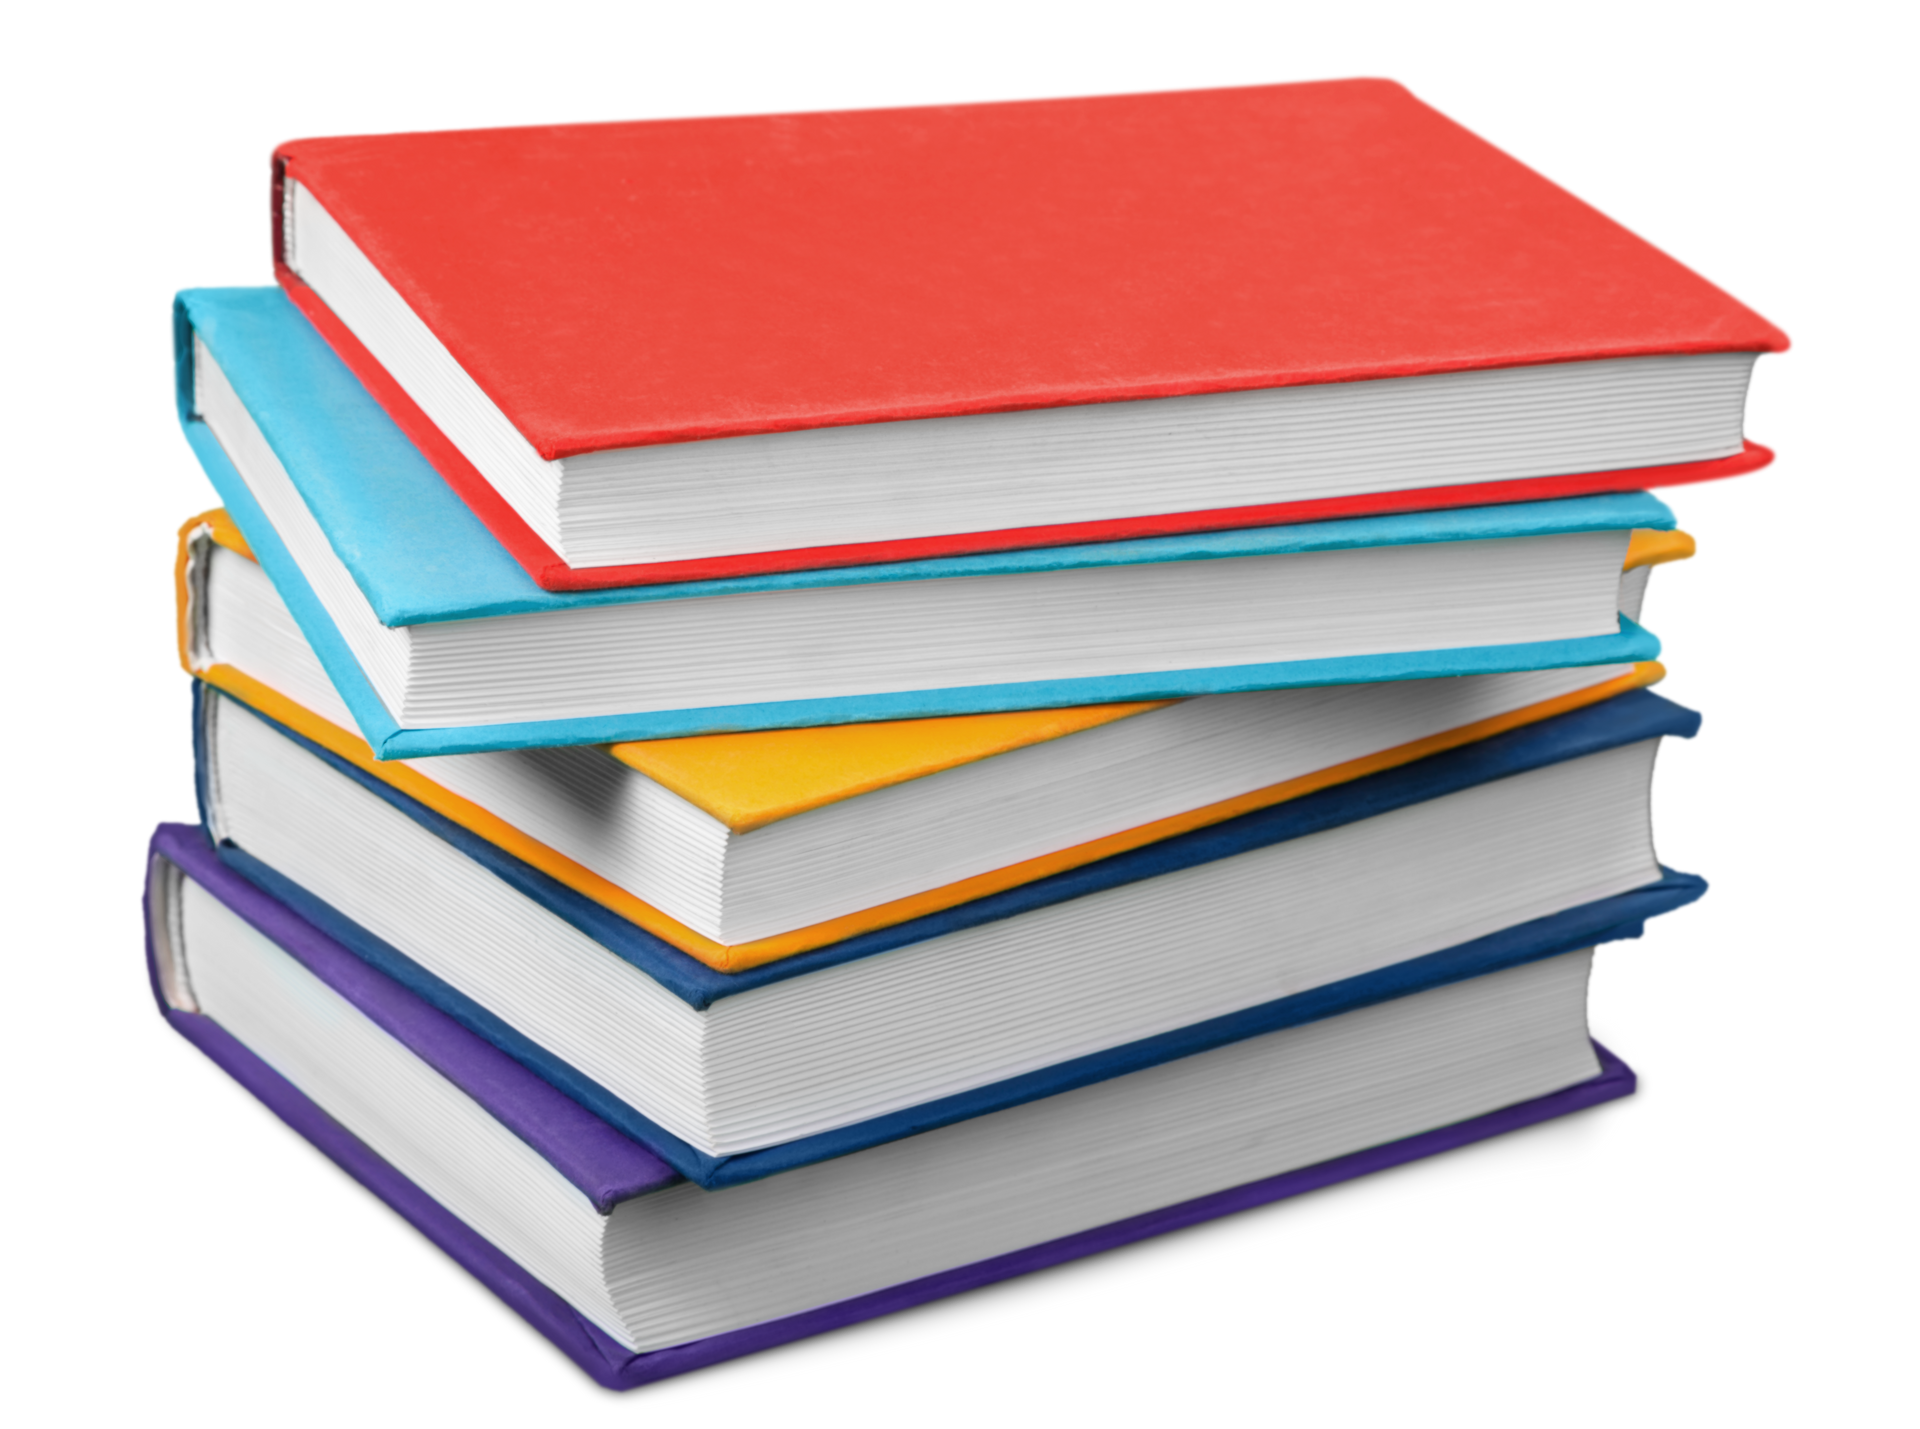 A stack of books with different colors on a white background